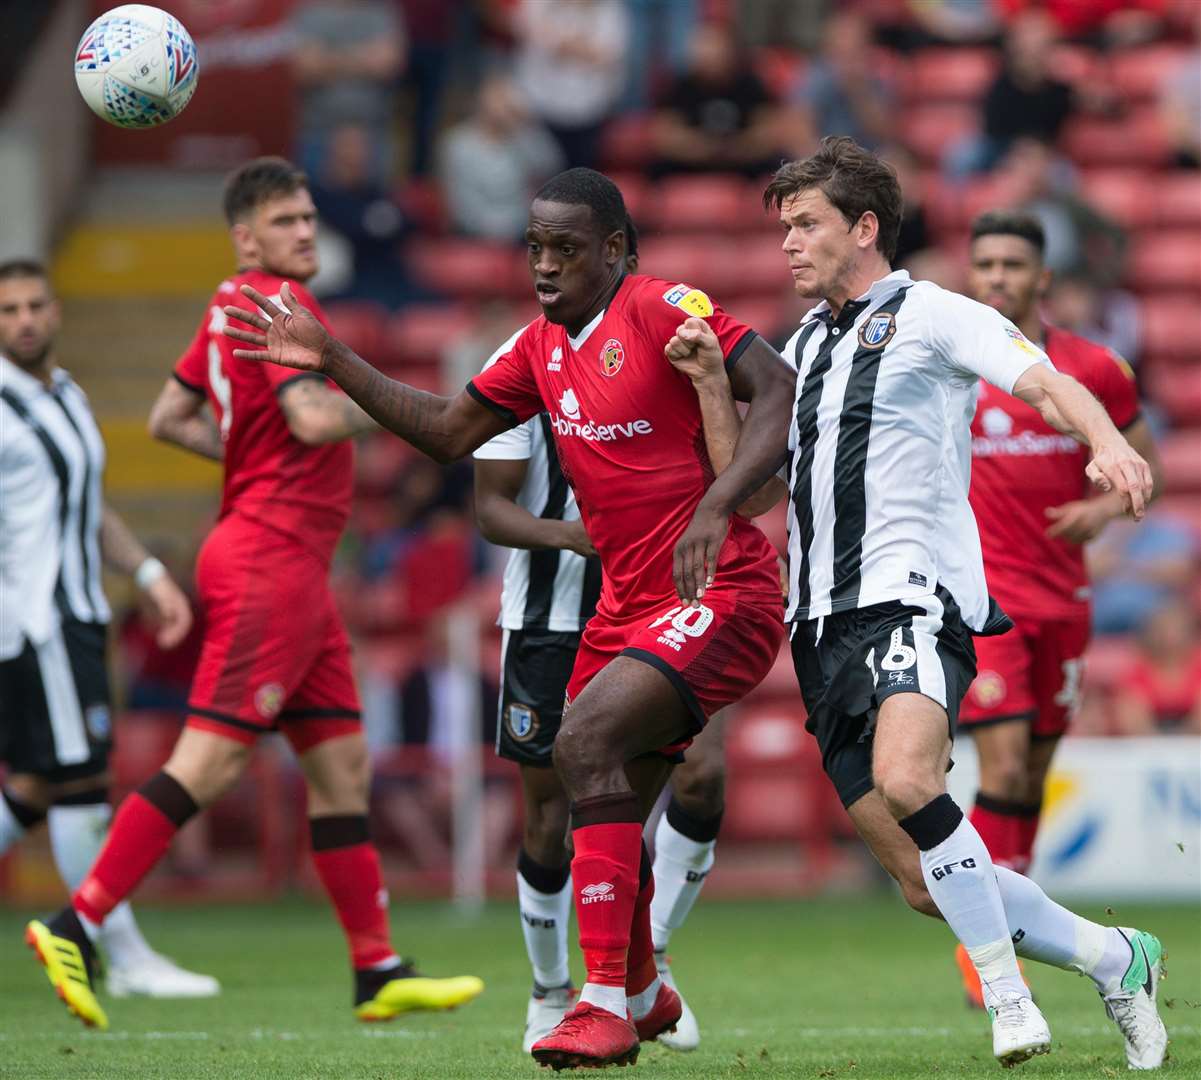 Gillingham's Billy Bingham challenges with Walsall's Isaiah Osbourne Picture: Ady Kerry